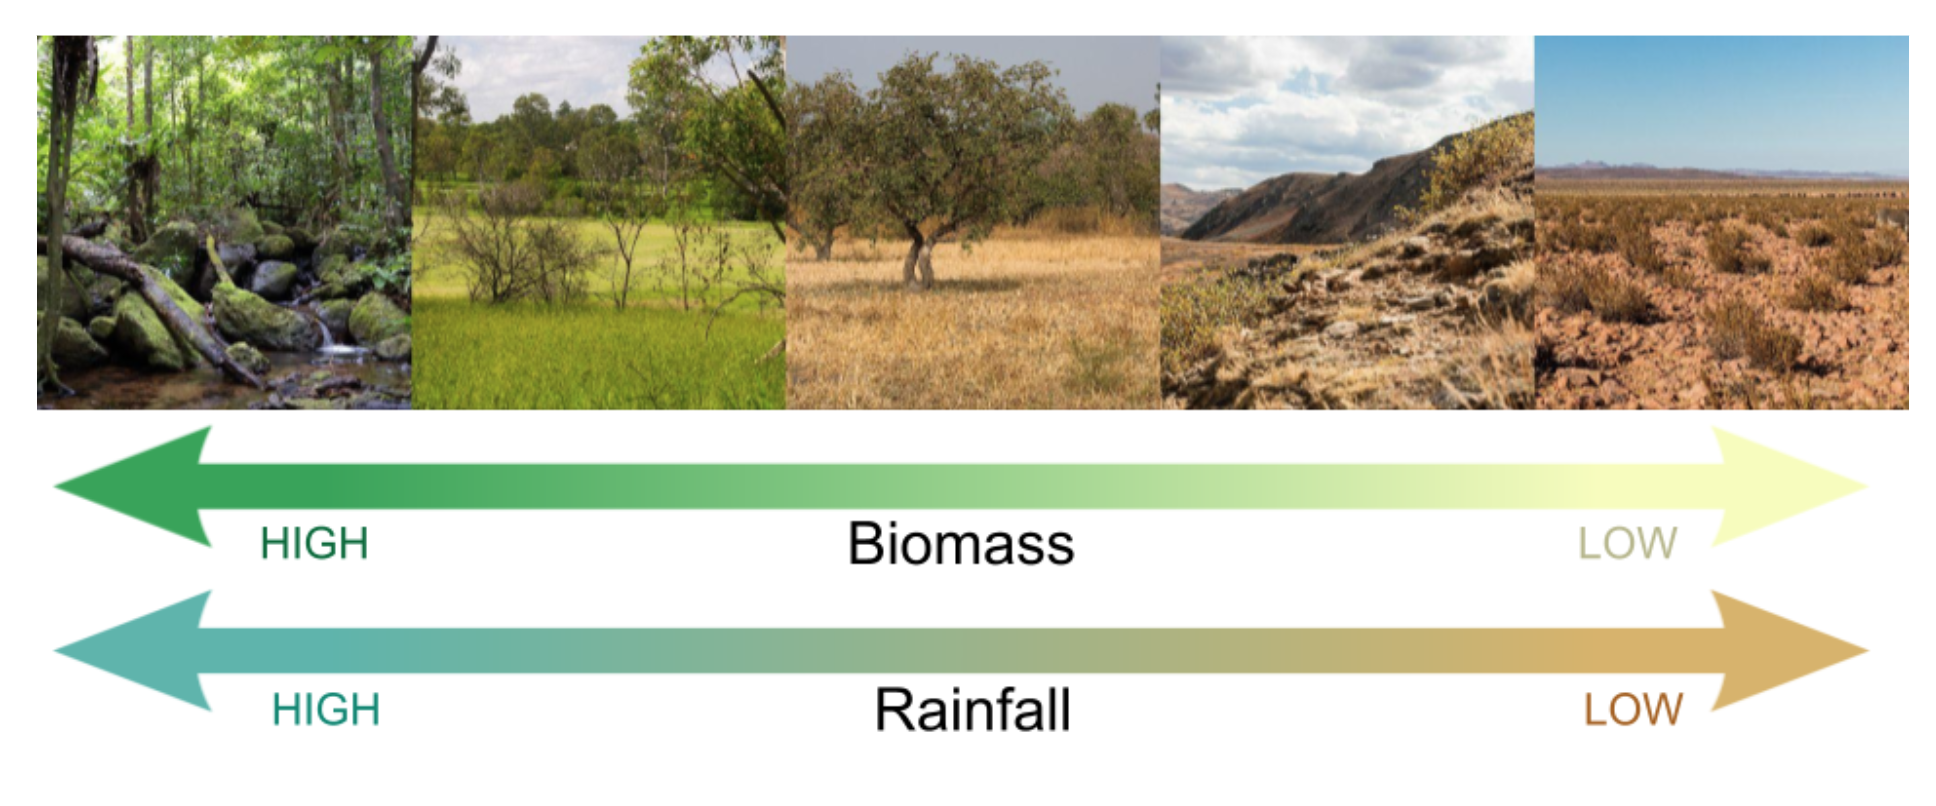 Types of vegetation communities along a rainfall gradient from very high (left), to very low (right).  This rainfall gradient corresponds very closely to biomass levels, with most fire occurring in the middle.